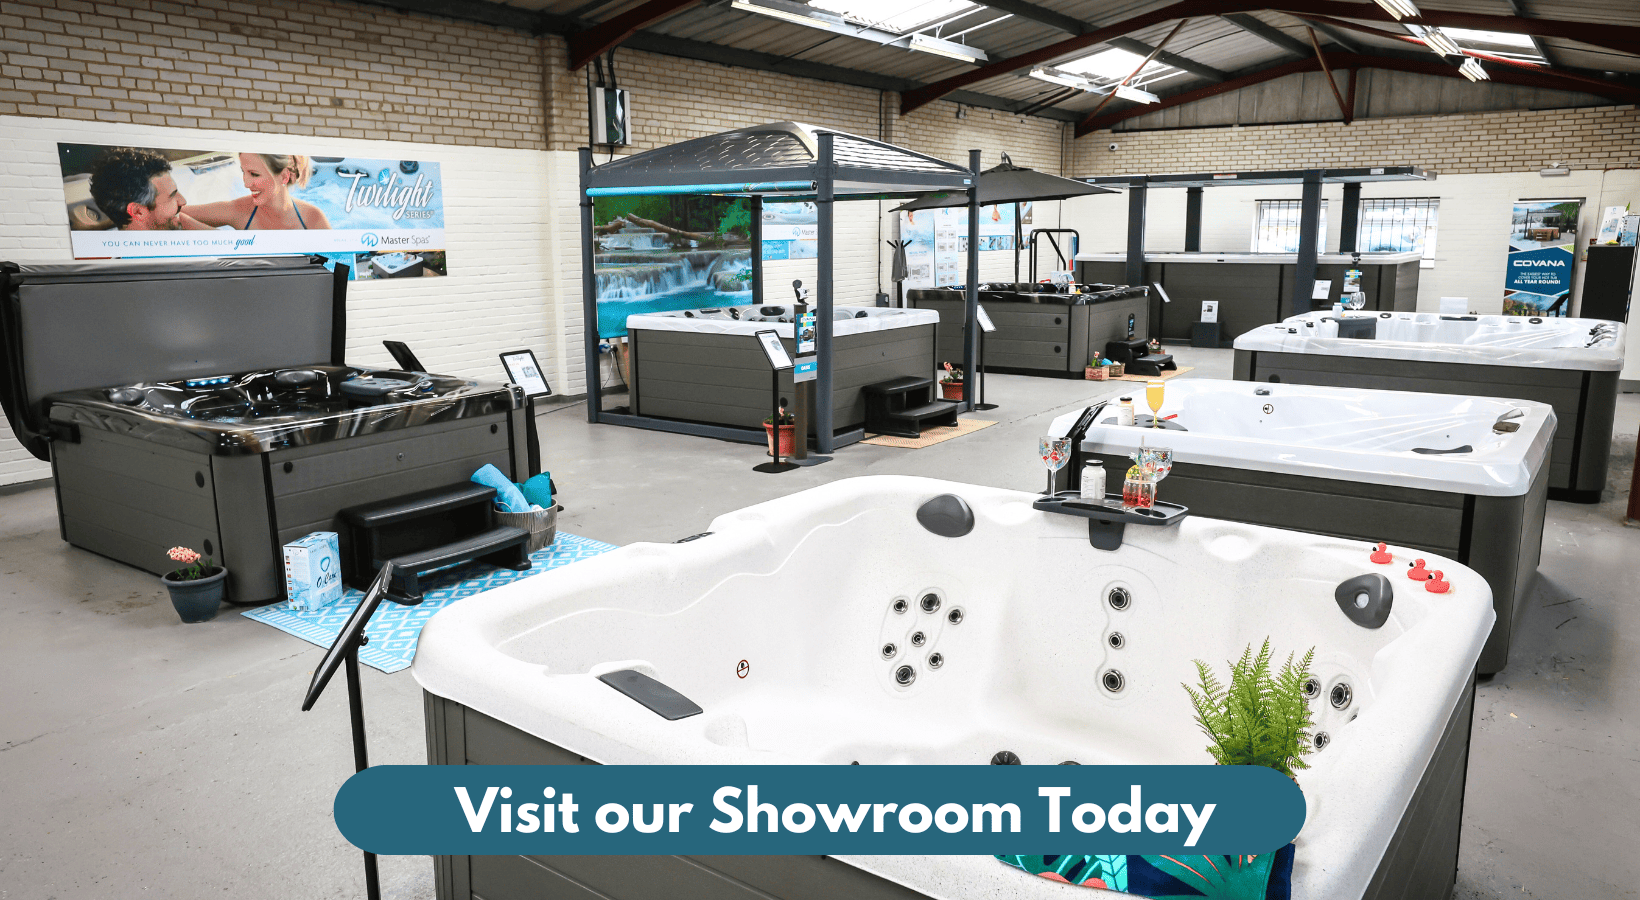 Bournemouth hot tub showroom, with many spas on display!